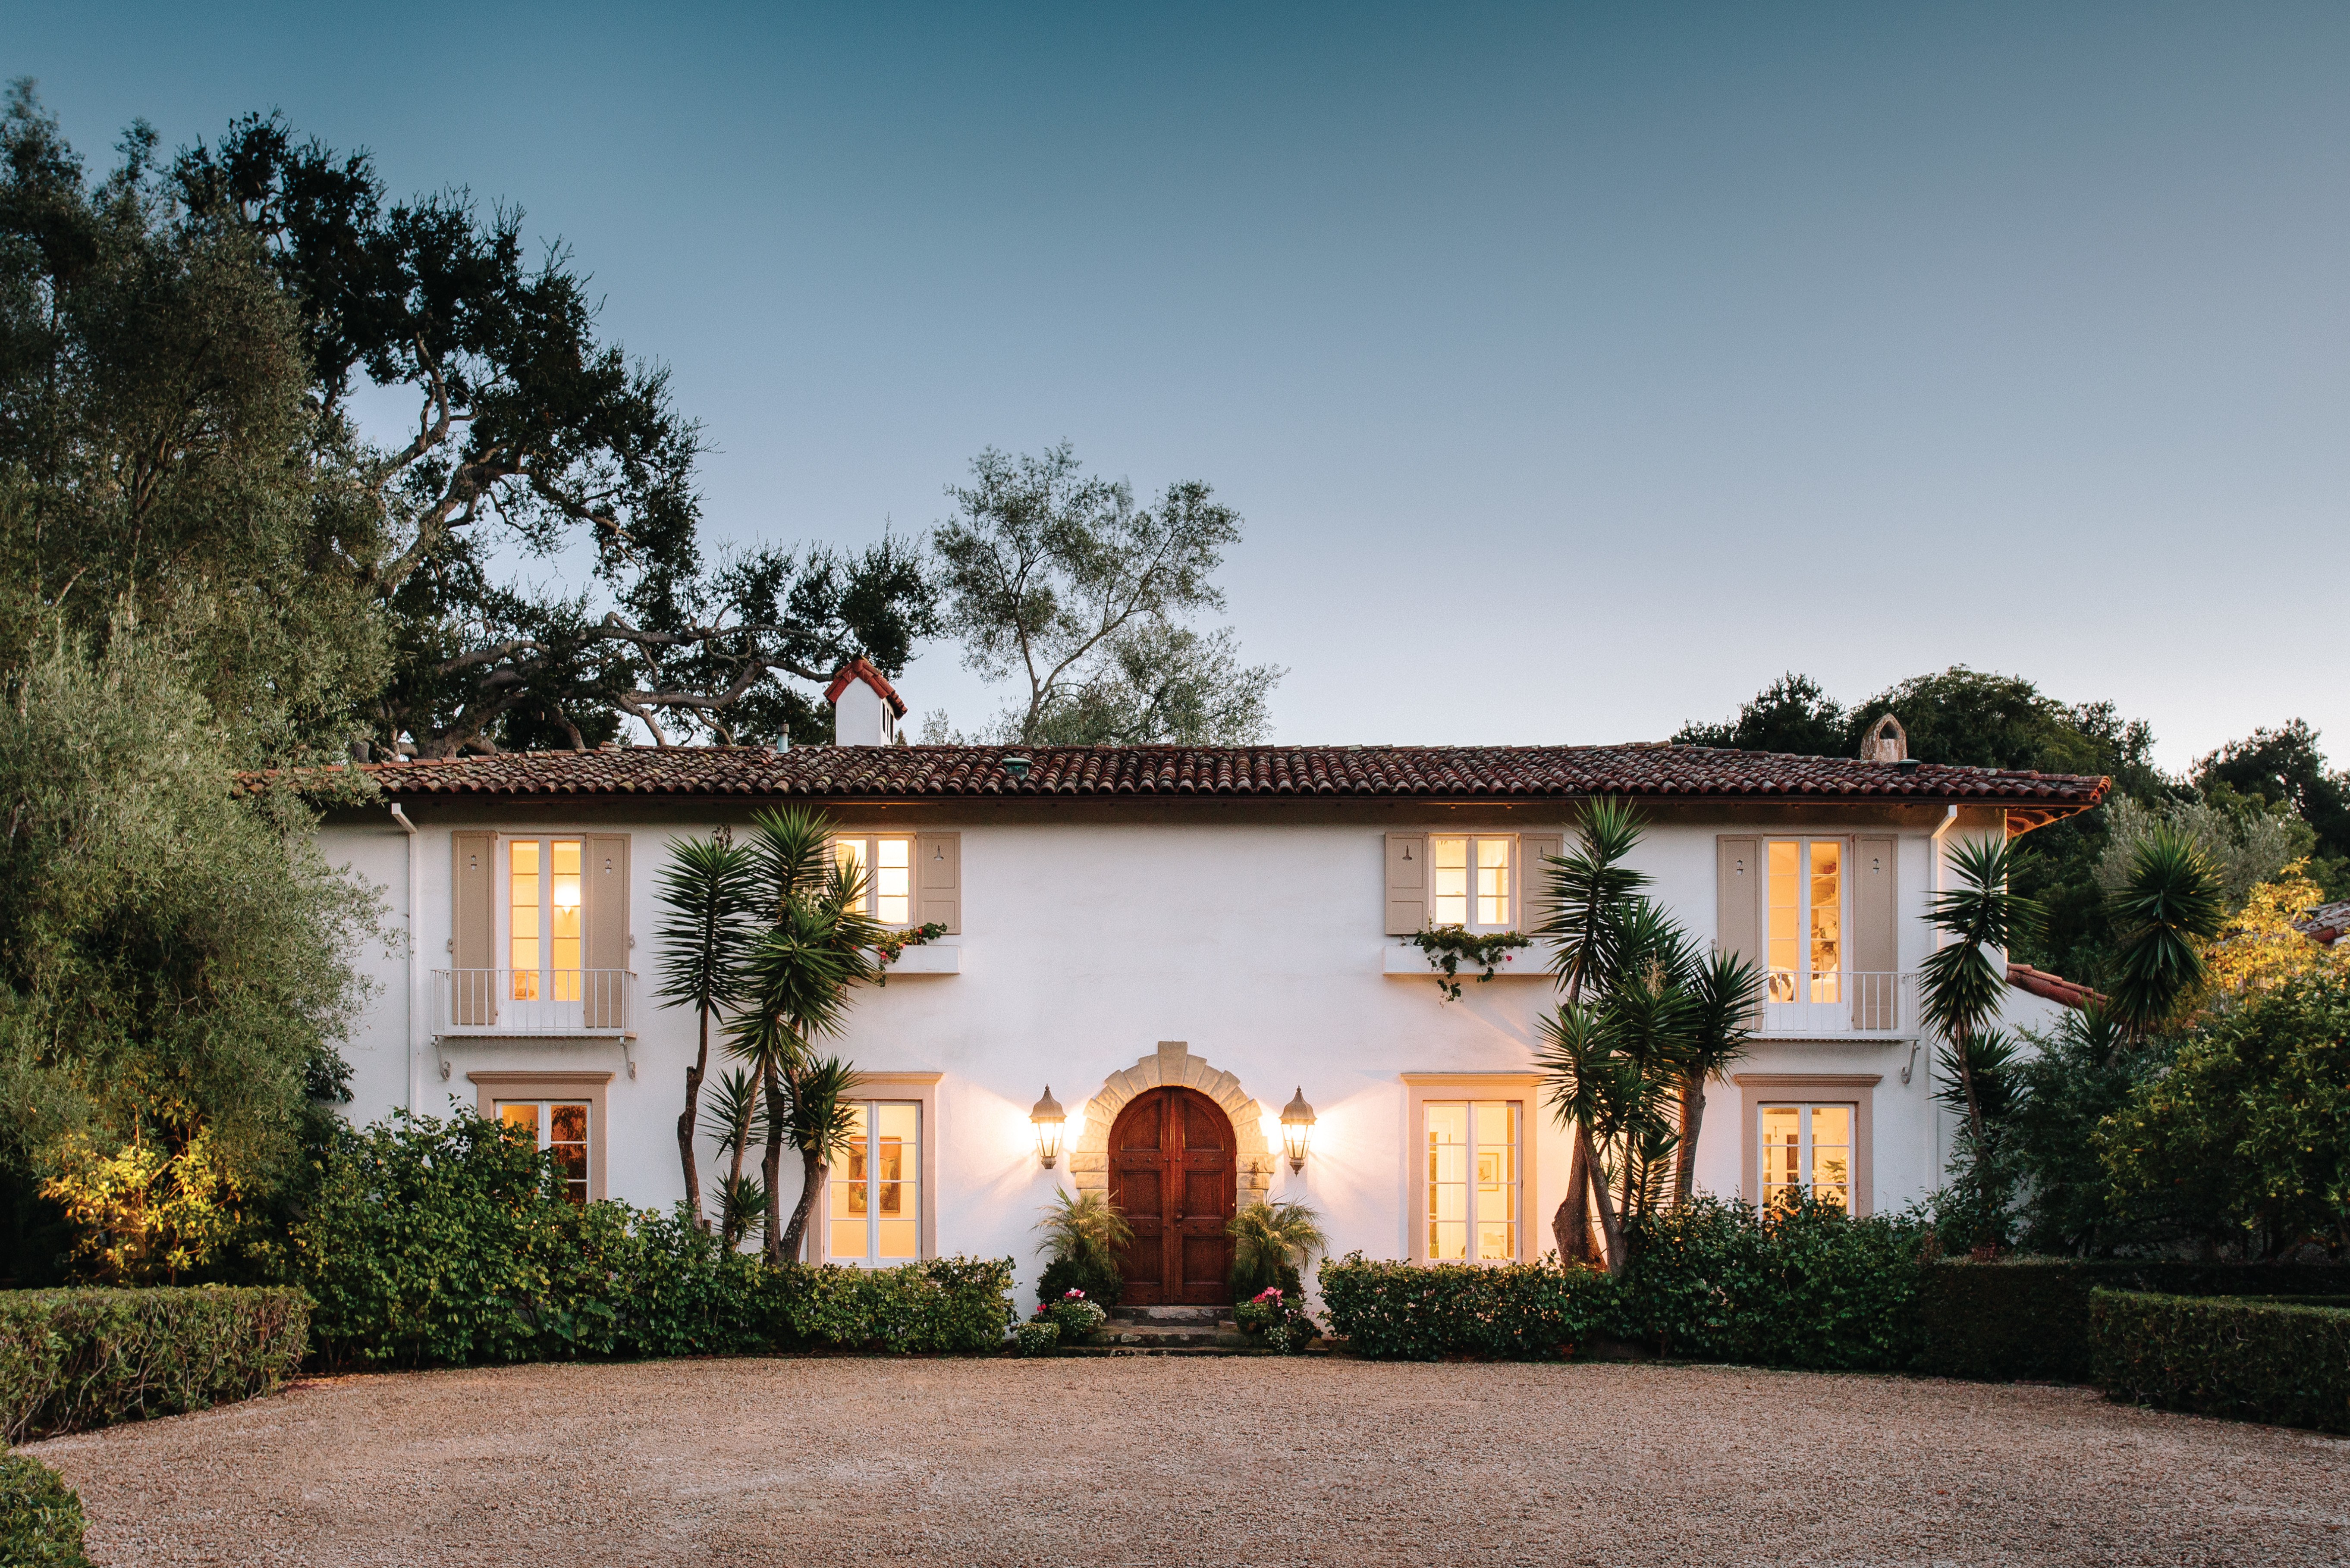 Spanish Colonial Style Santa Barbara | Architectural Digest